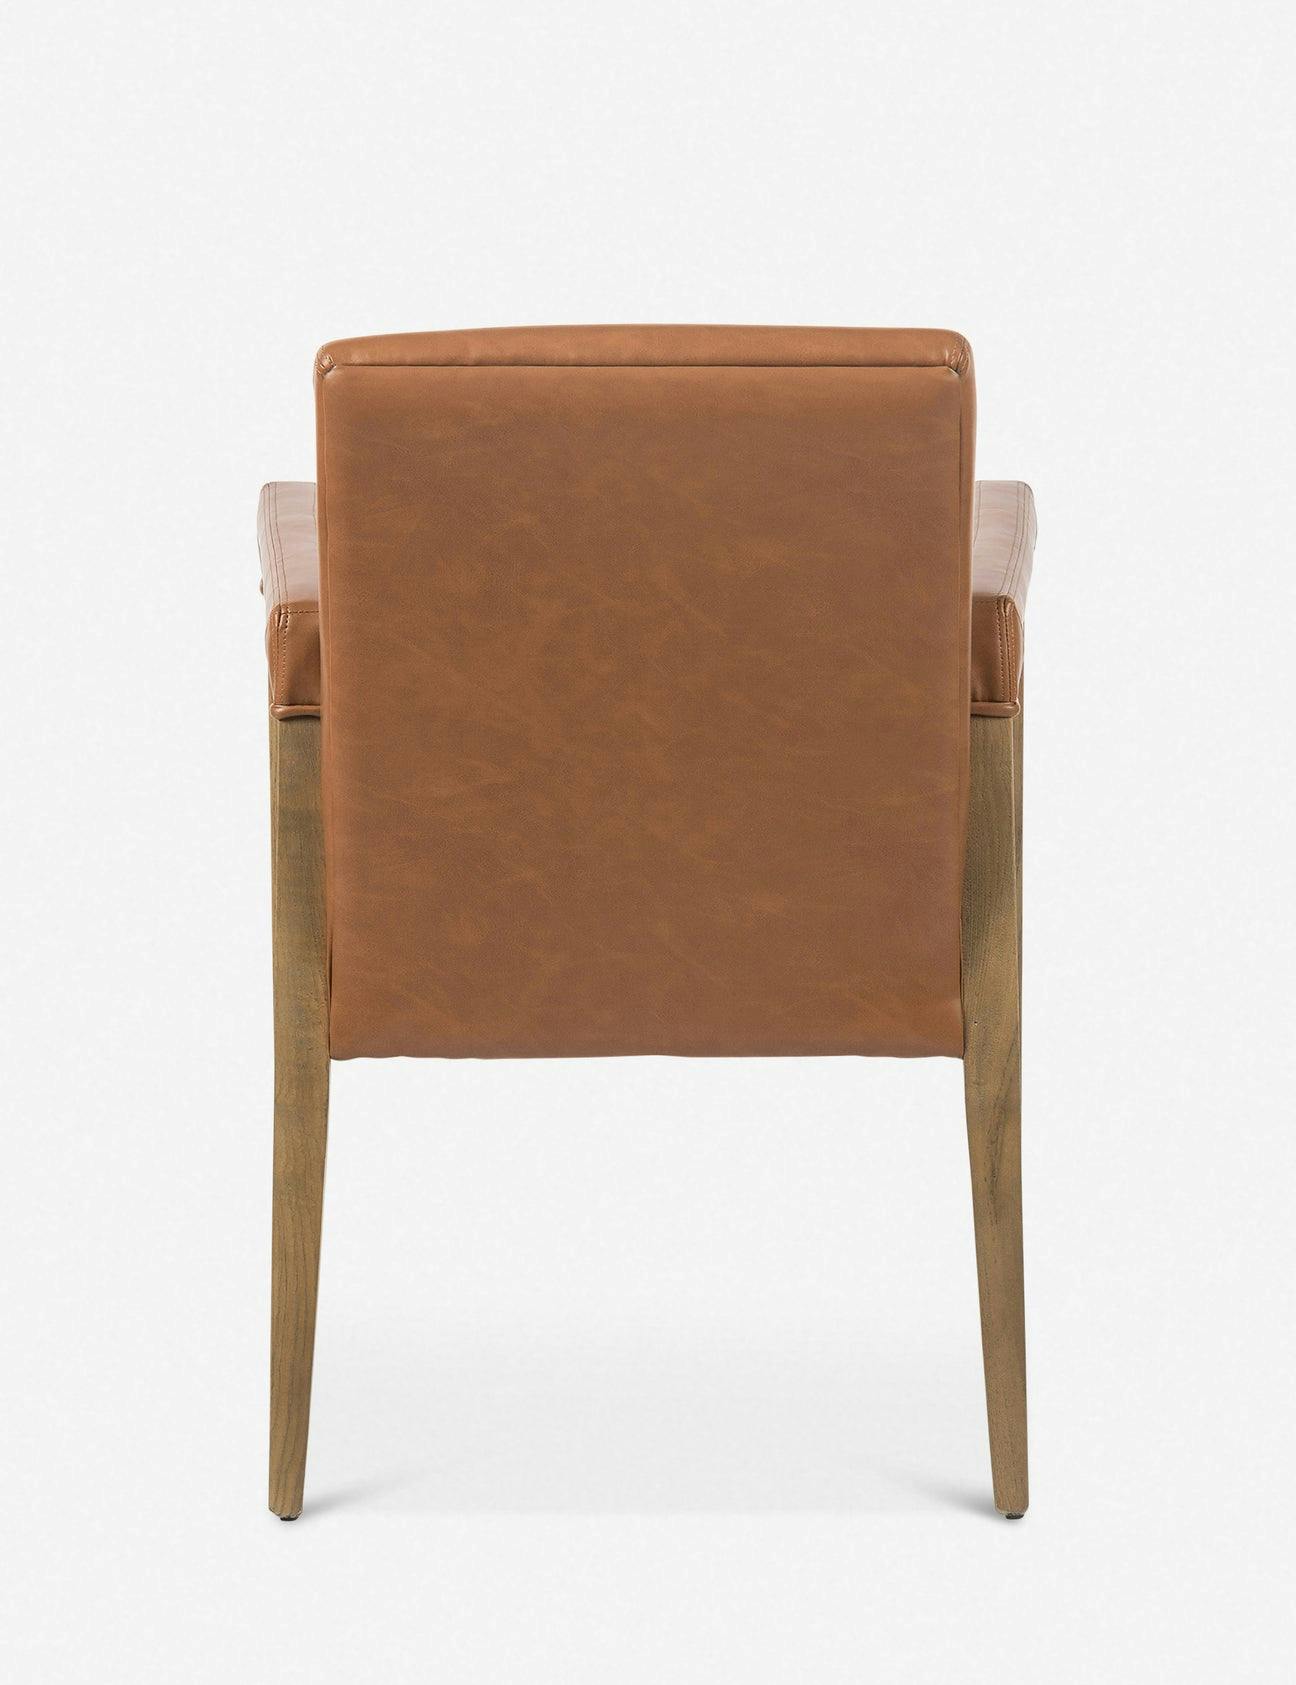 Marla Dining Chair - Tan Leather